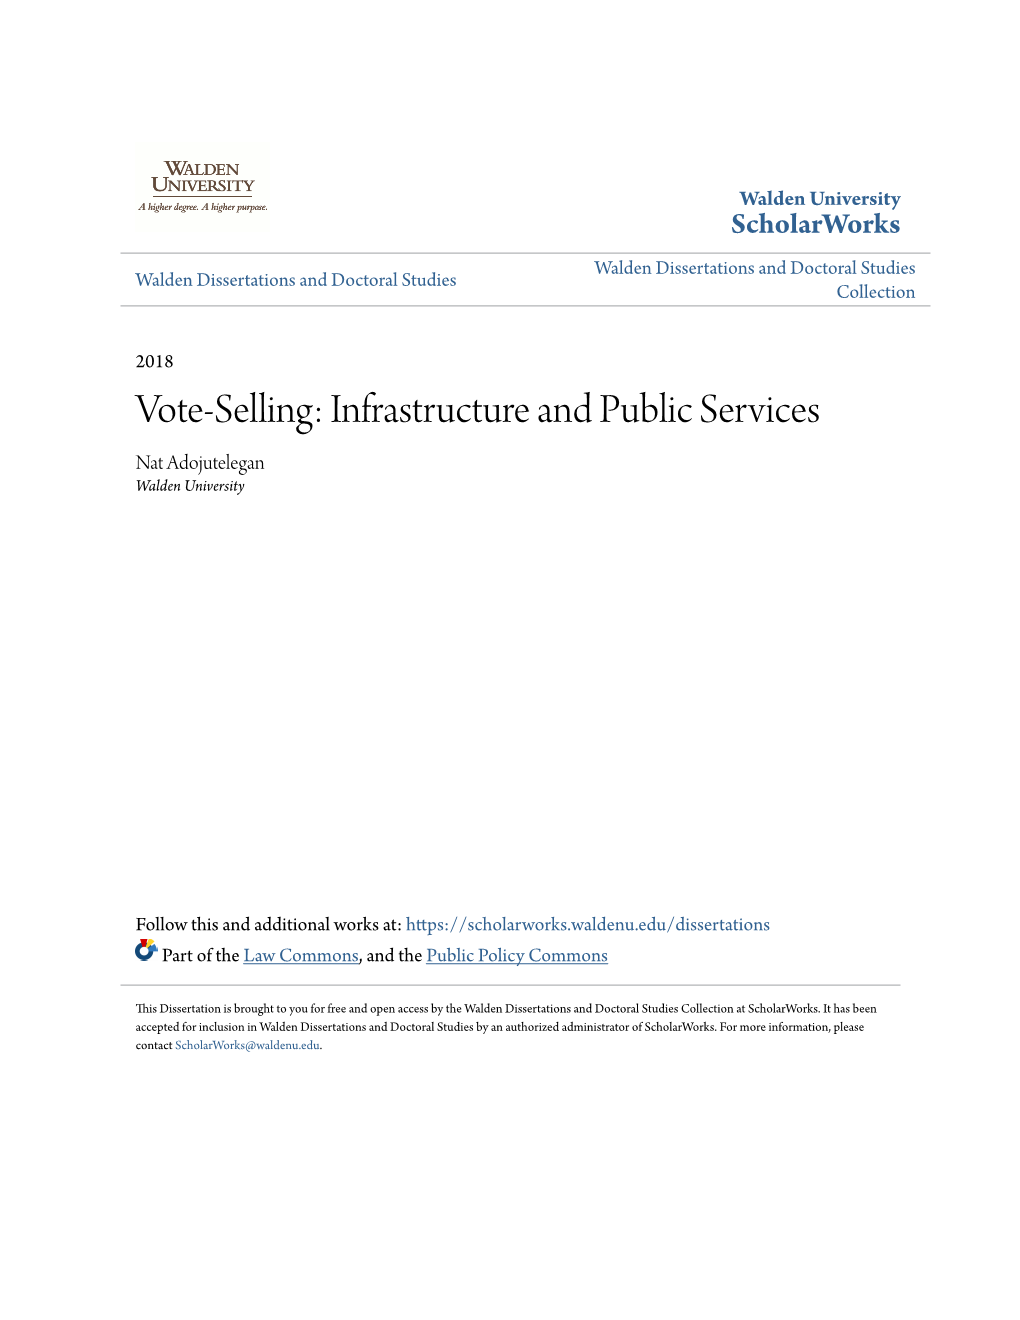 Vote-Selling: Infrastructure and Public Services Nat Adojutelegan Walden University